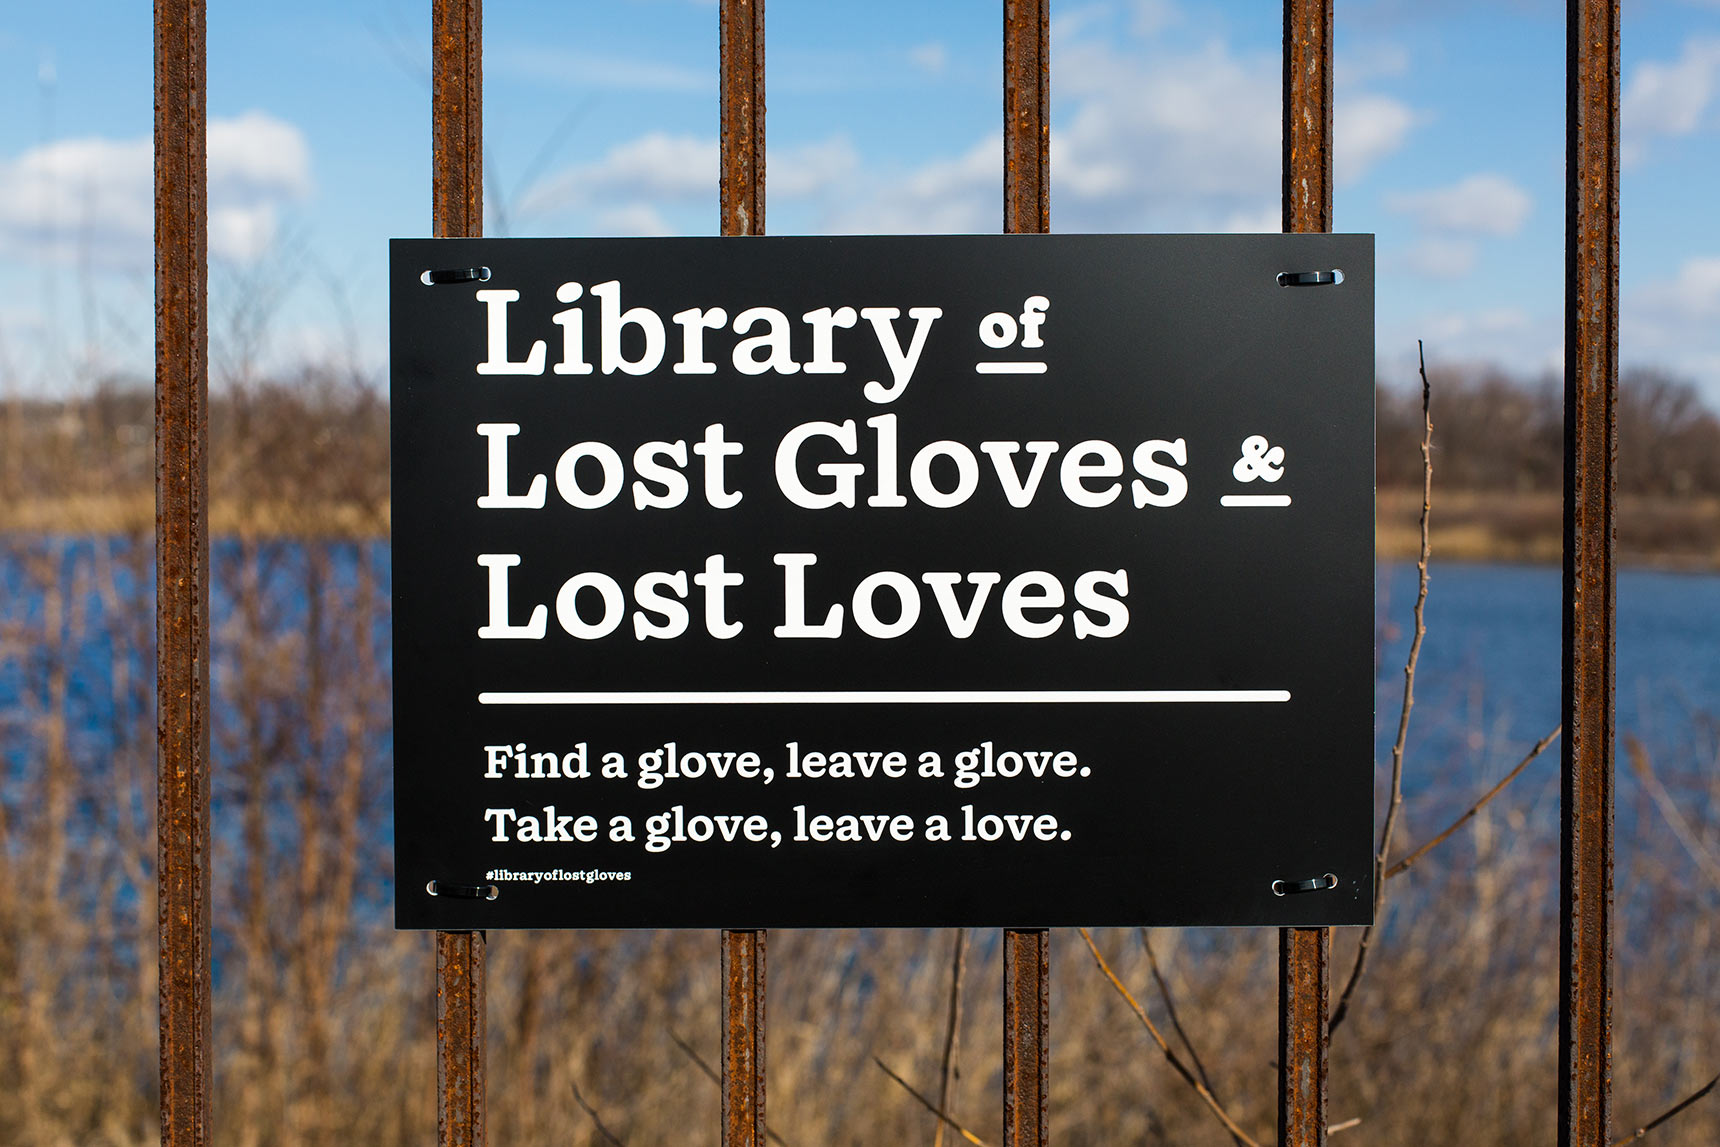 Library of Lost Gloves & Lost Loves sign